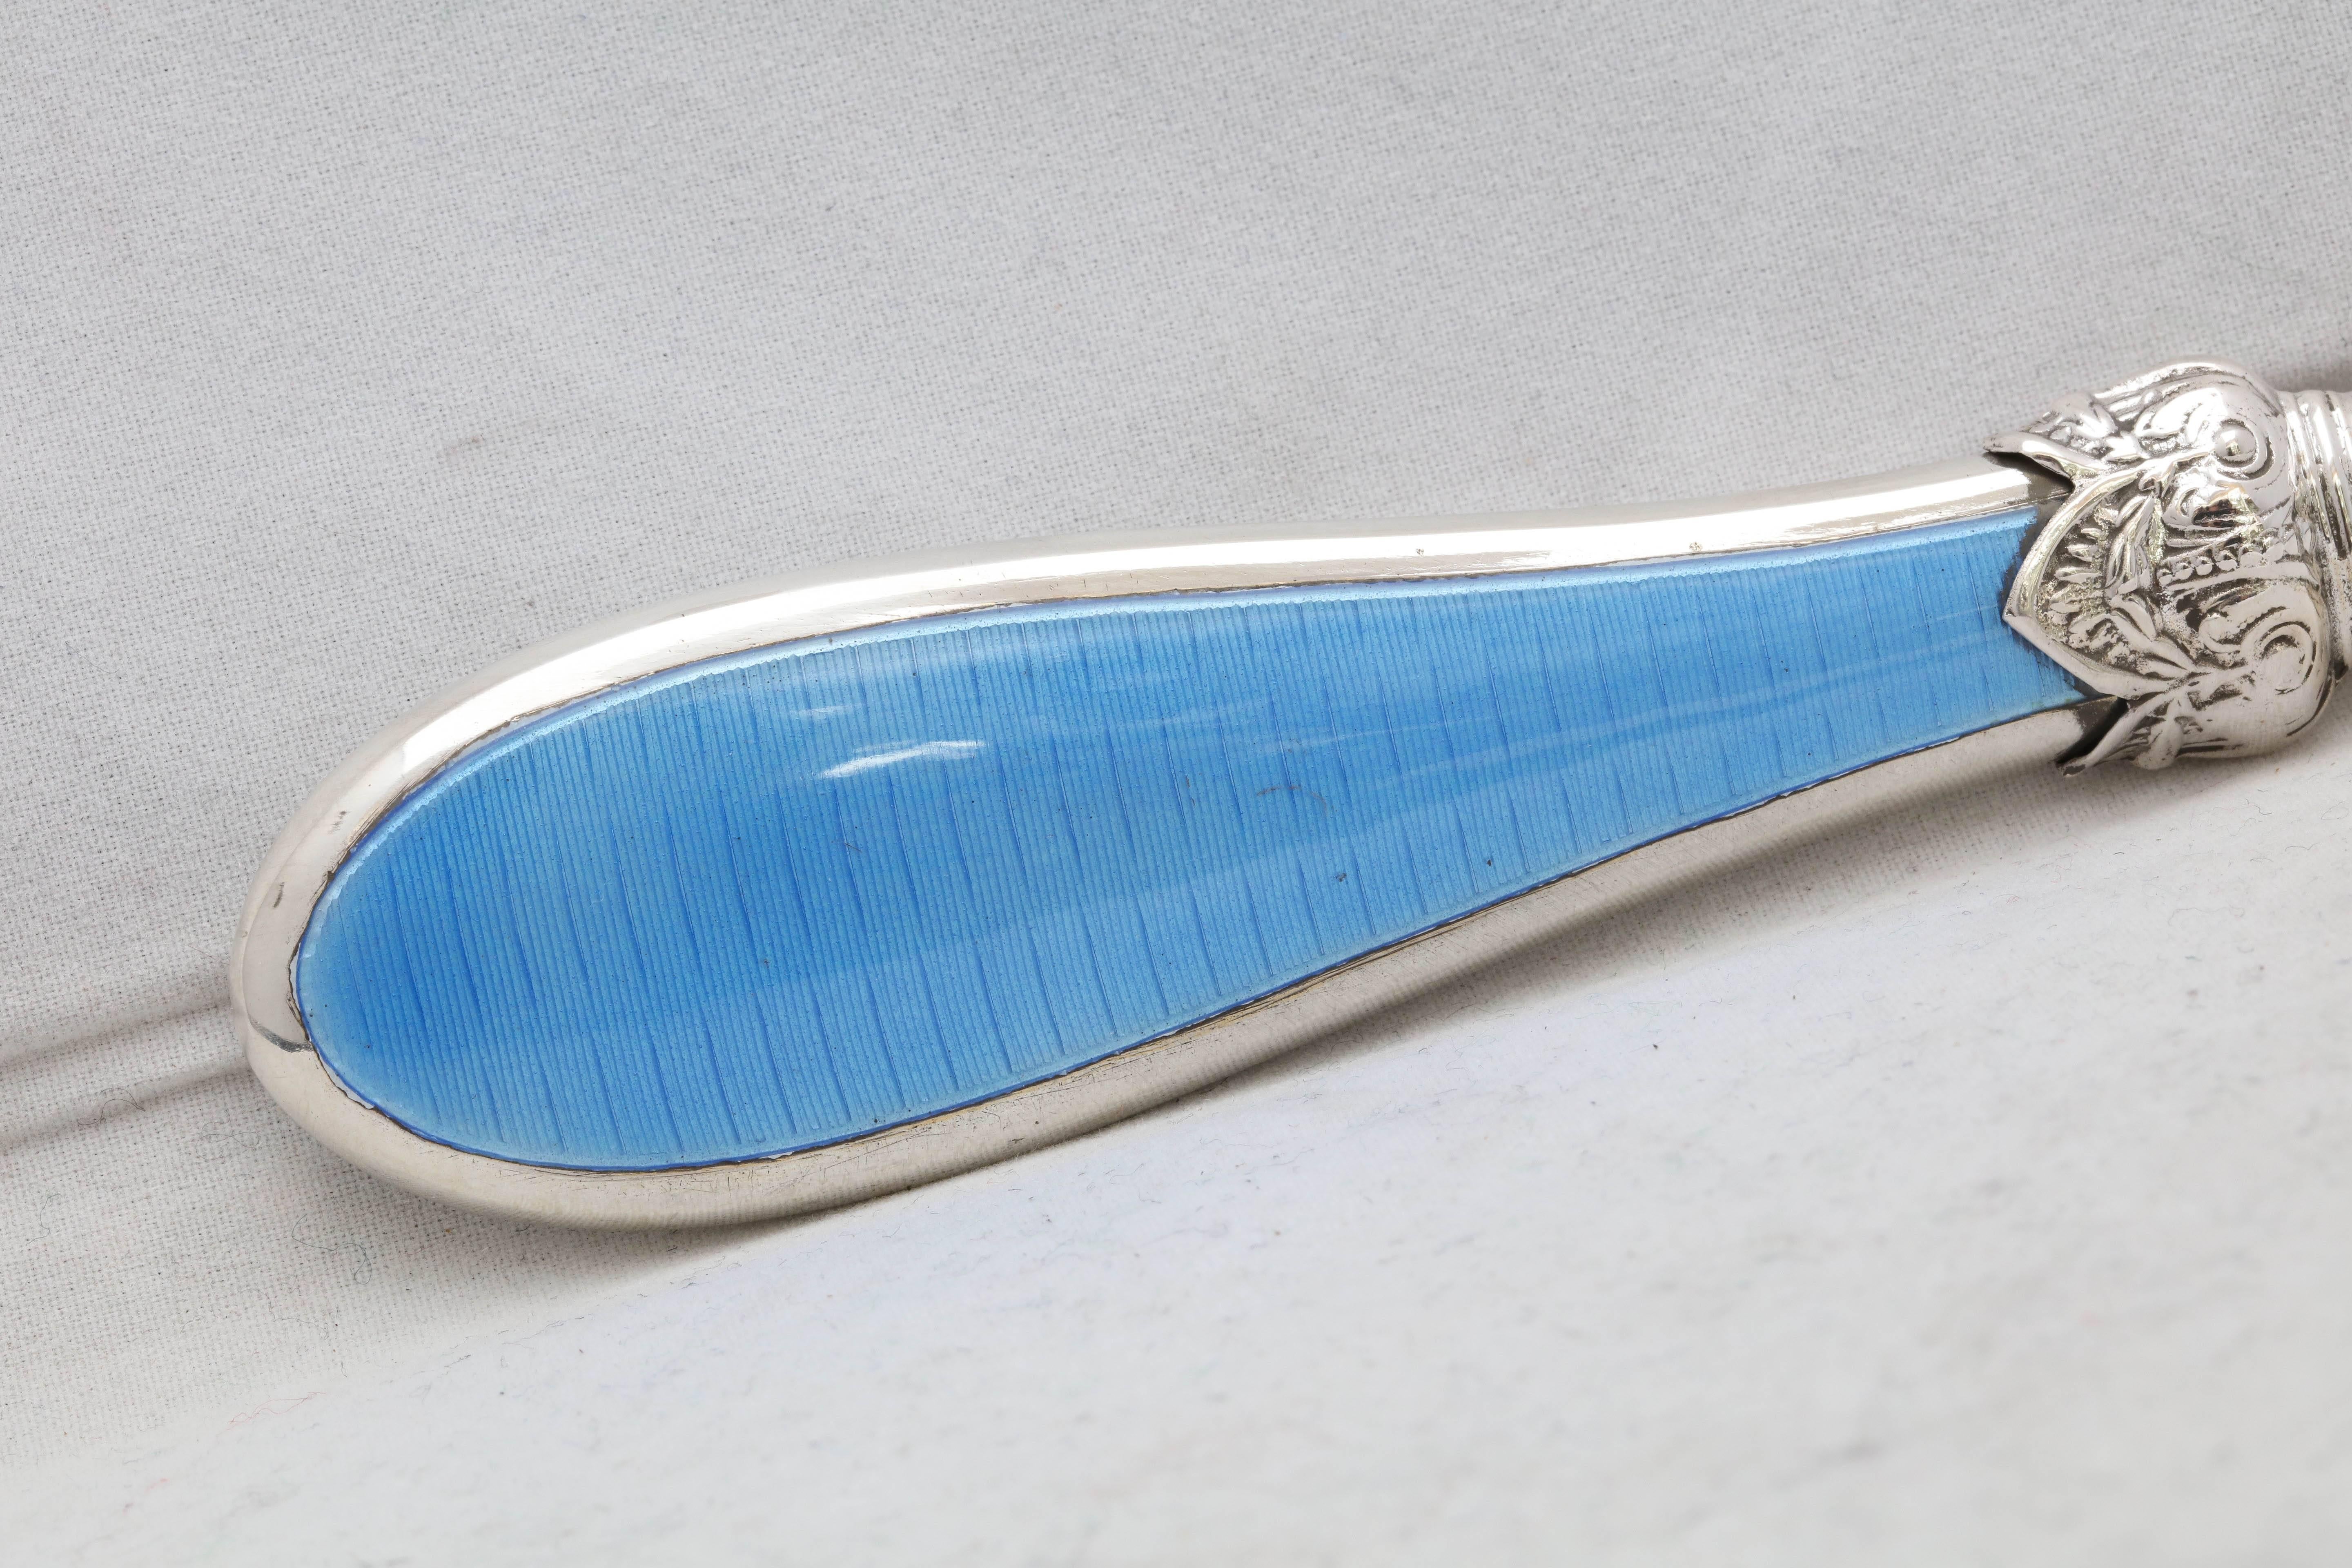 Victorian, sterling silver and blue guilloche enamel letter opener paper knife, Birmingham, England, 1857, Joseph Gloster maker. Blade is decorated with etched sea creatures. Guilloche enamel is a lovely shade of blue. @8 1/2 inches long x @ 1 1/4